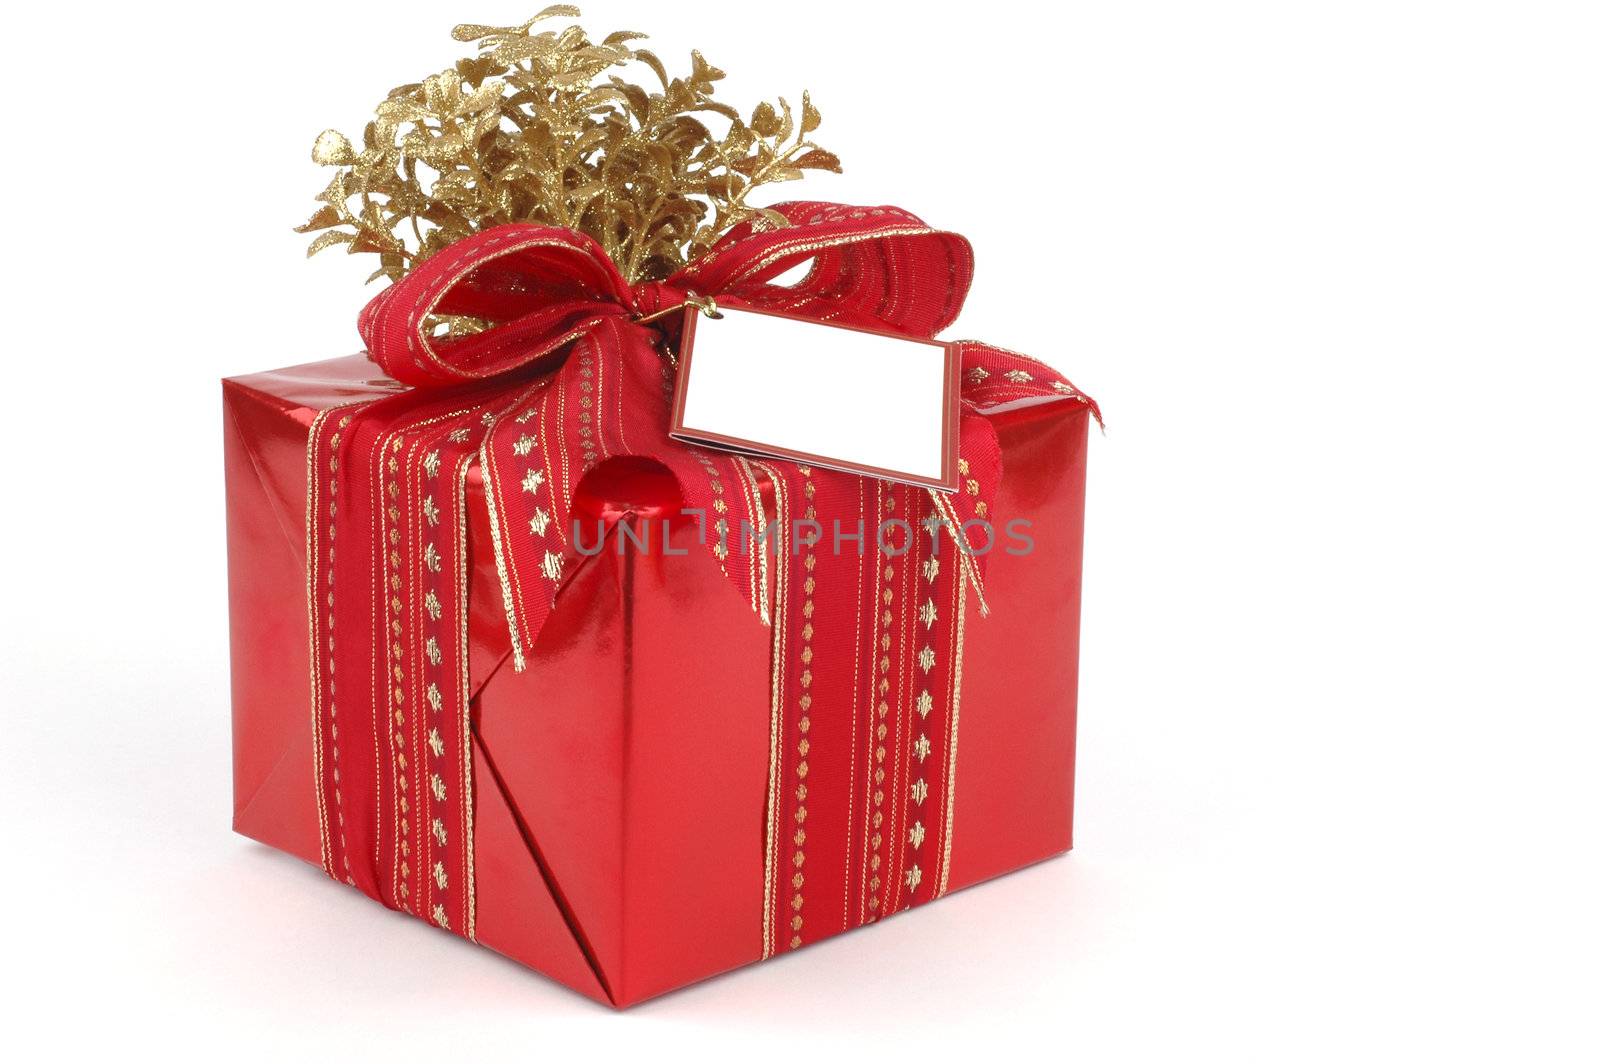 Beatifully wrapped present in red and gold.